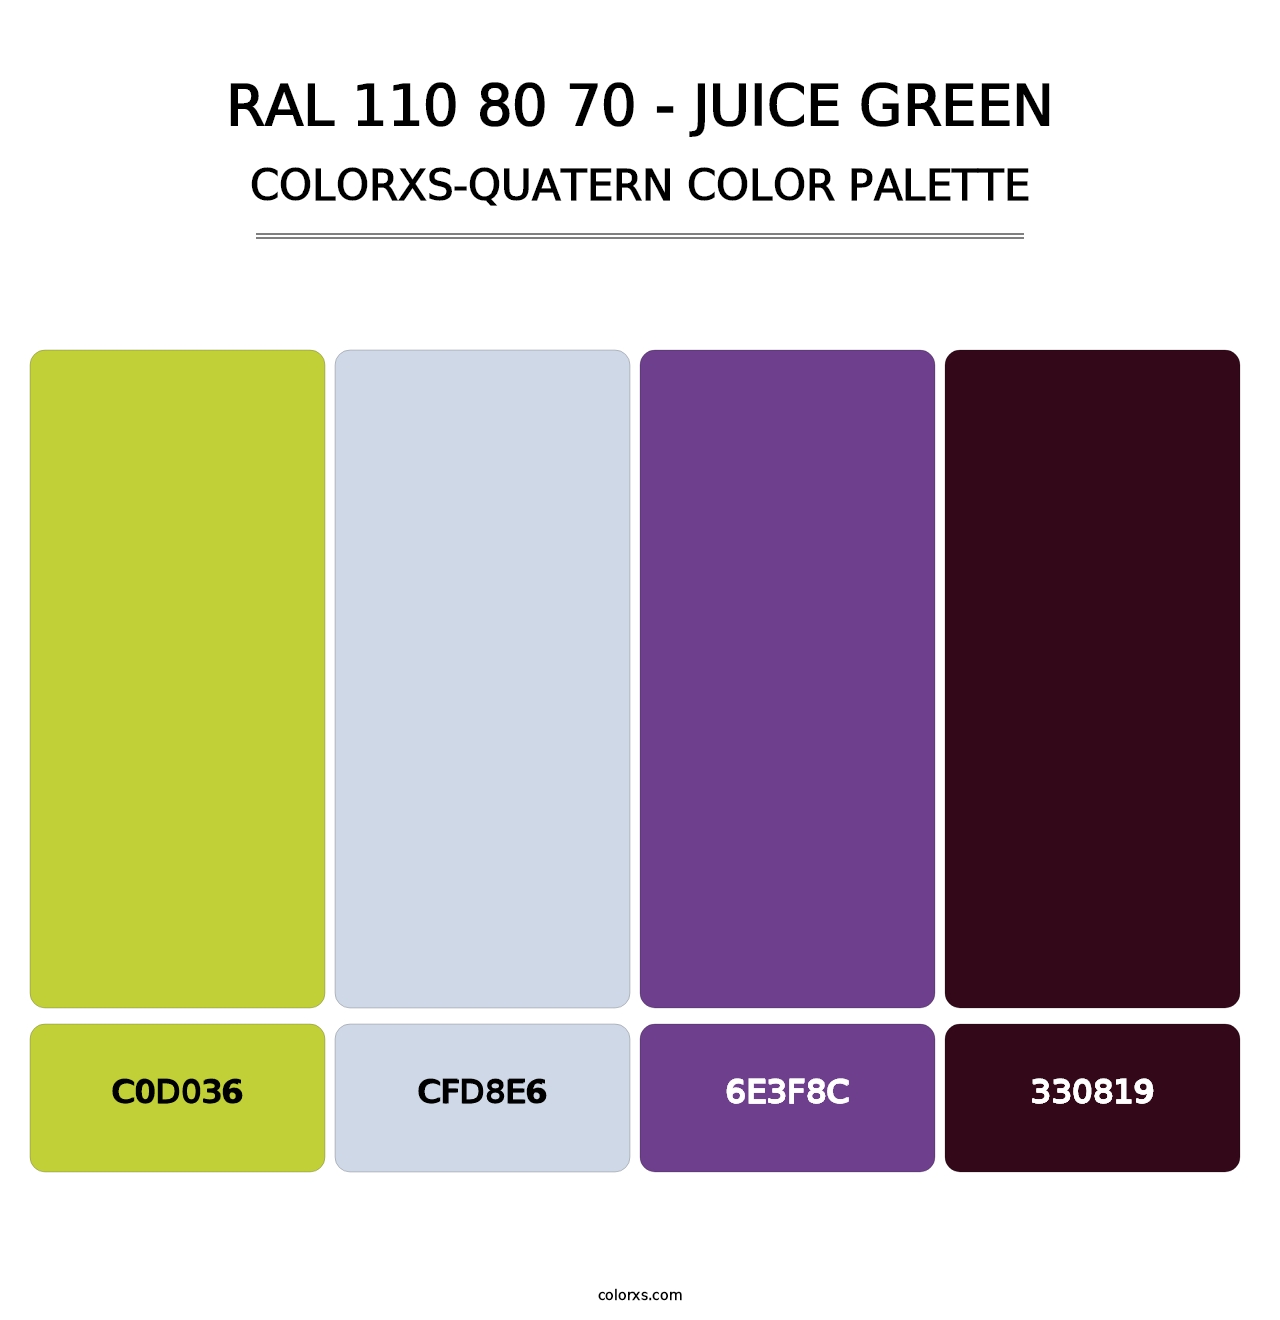 RAL 110 80 70 - Juice Green - Colorxs Quatern Palette